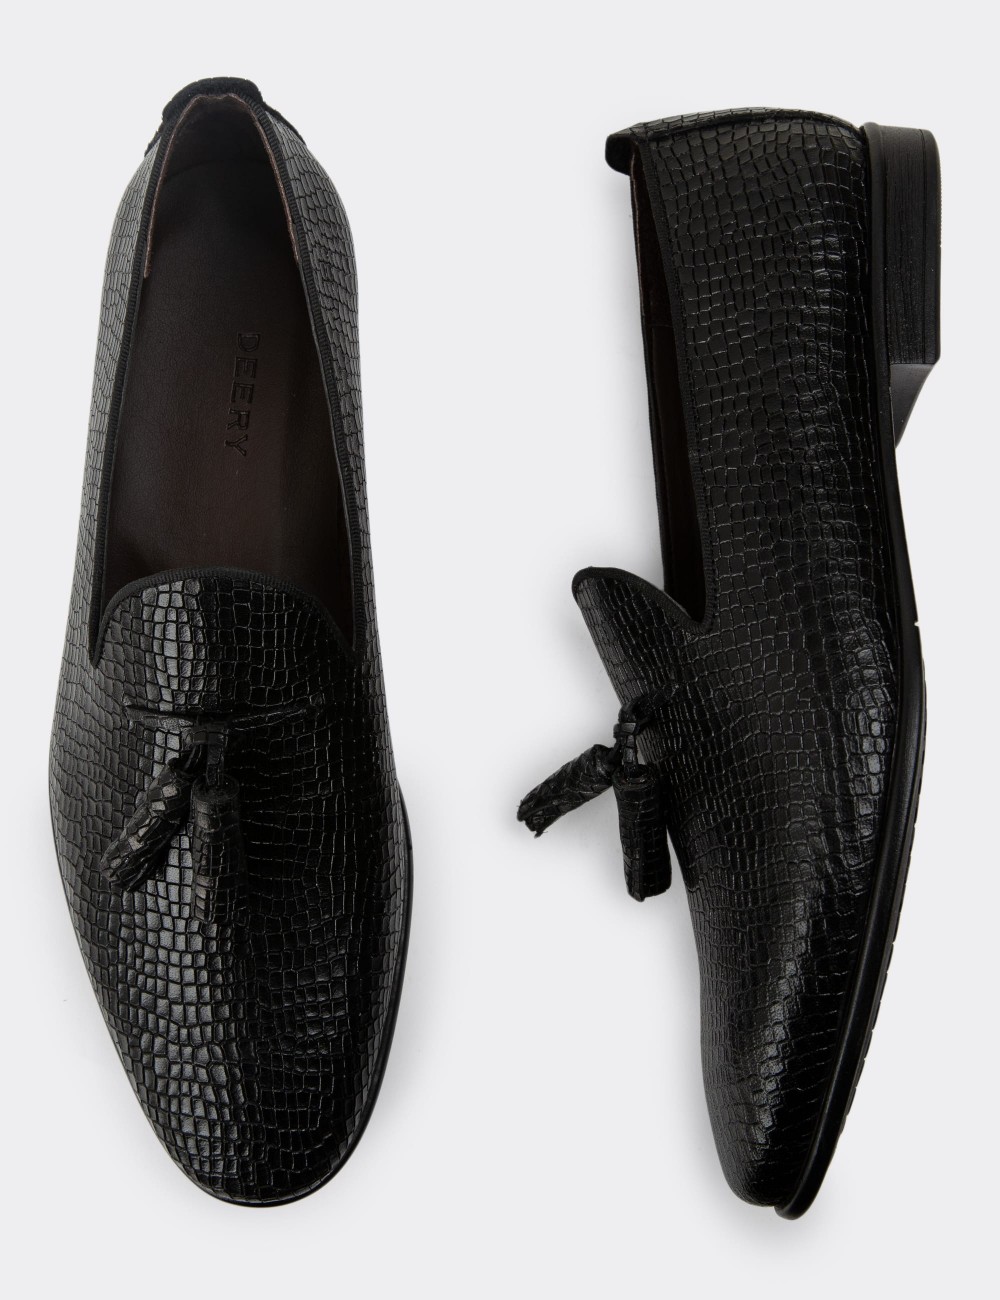 Black Leather Loafers - 01702MSYHC09